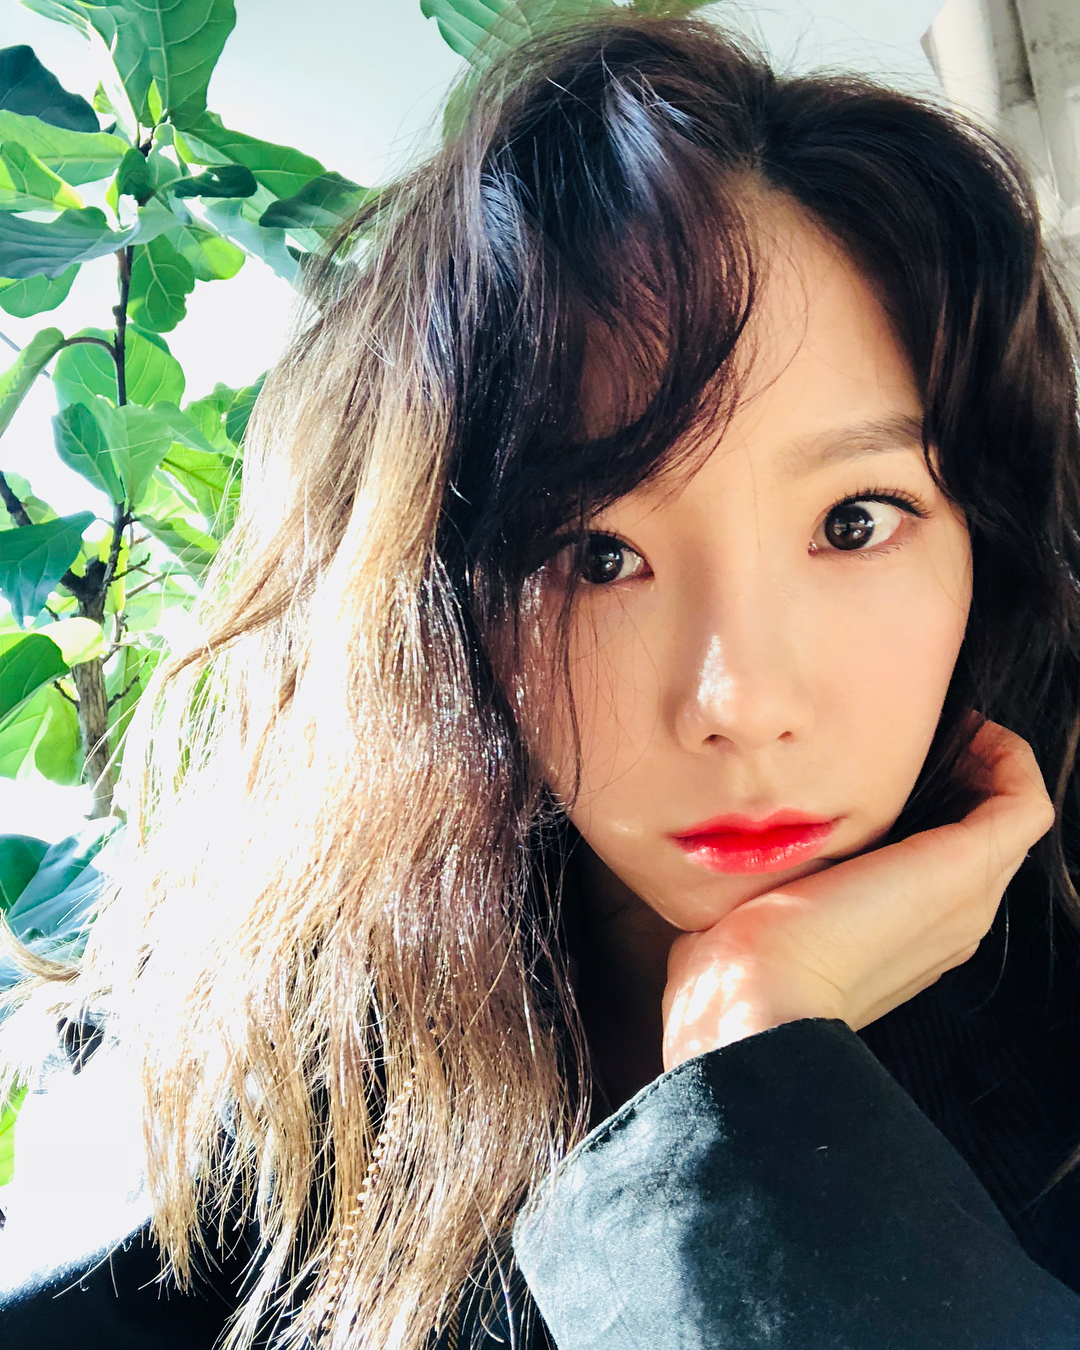 See the gorgeous selfies from SNSD TaeYeon - Wonderful Generation